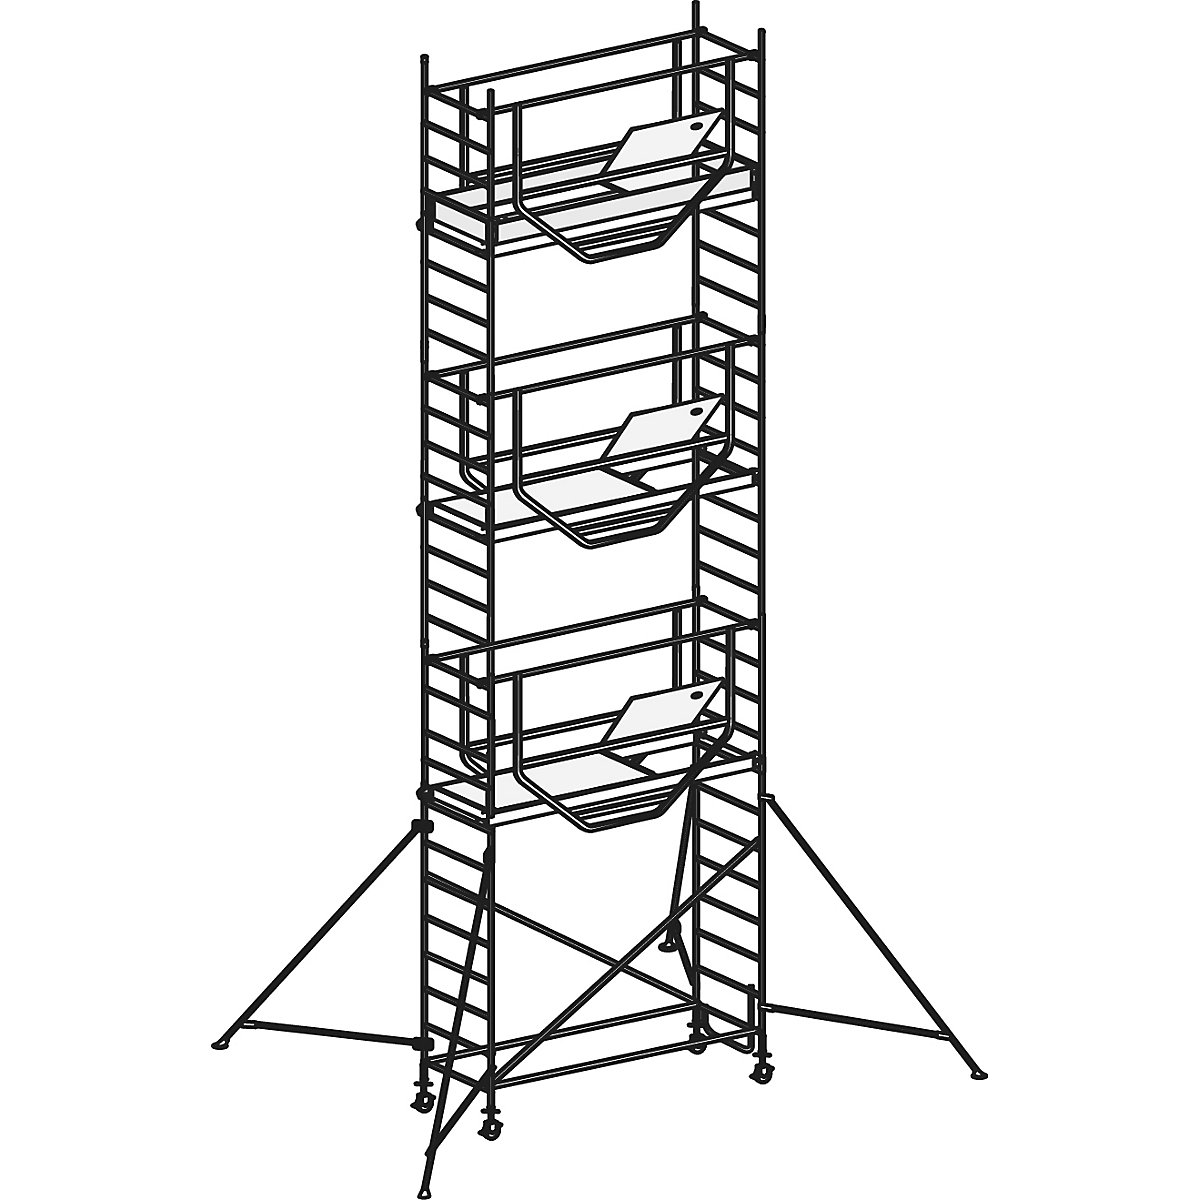 ADVANCED SAFE-T 7075 mobile access tower – HYMER, welded, platform 2.08 x 0.61 m, max. working height 8.25 m-20